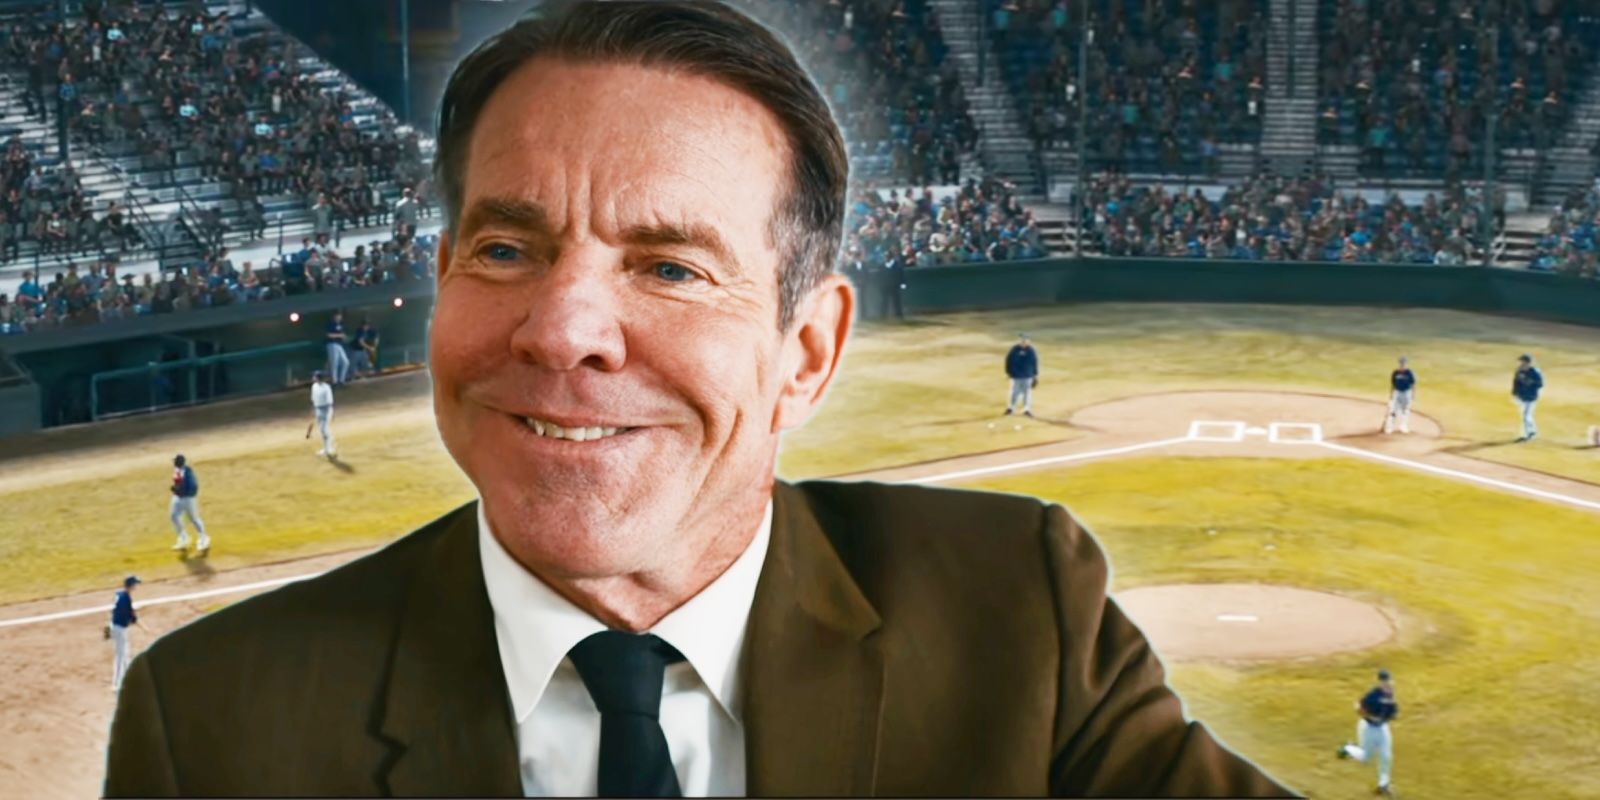 Dennis Quaid's Pastor Hill from The Hill over top of a baseball diamond